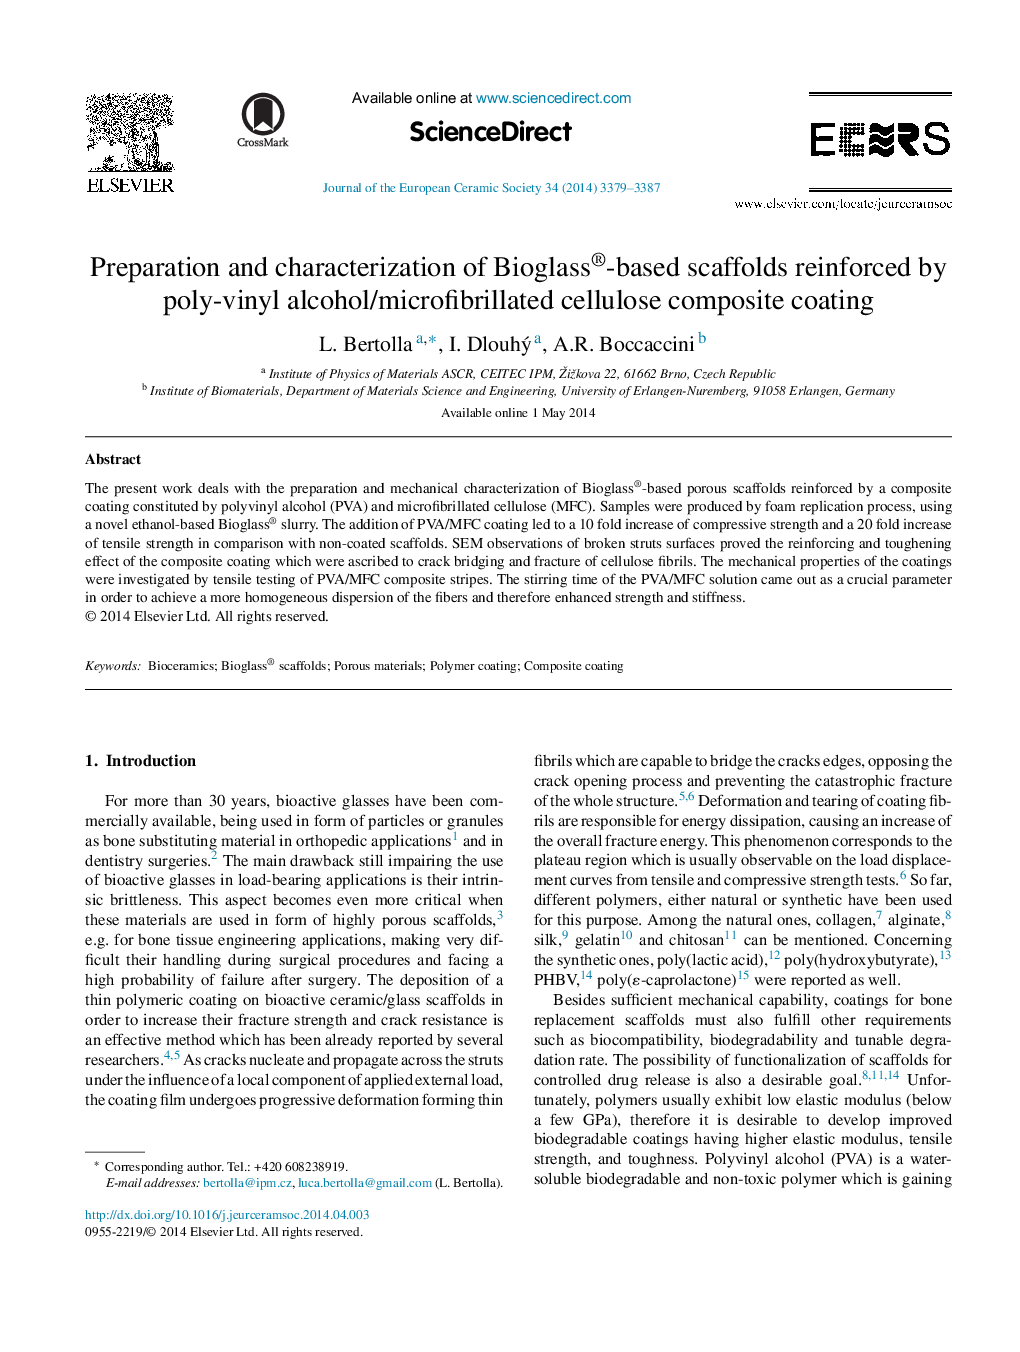 Preparation and characterization of Bioglass®-based scaffolds reinforced by poly-vinyl alcohol/microfibrillated cellulose composite coating